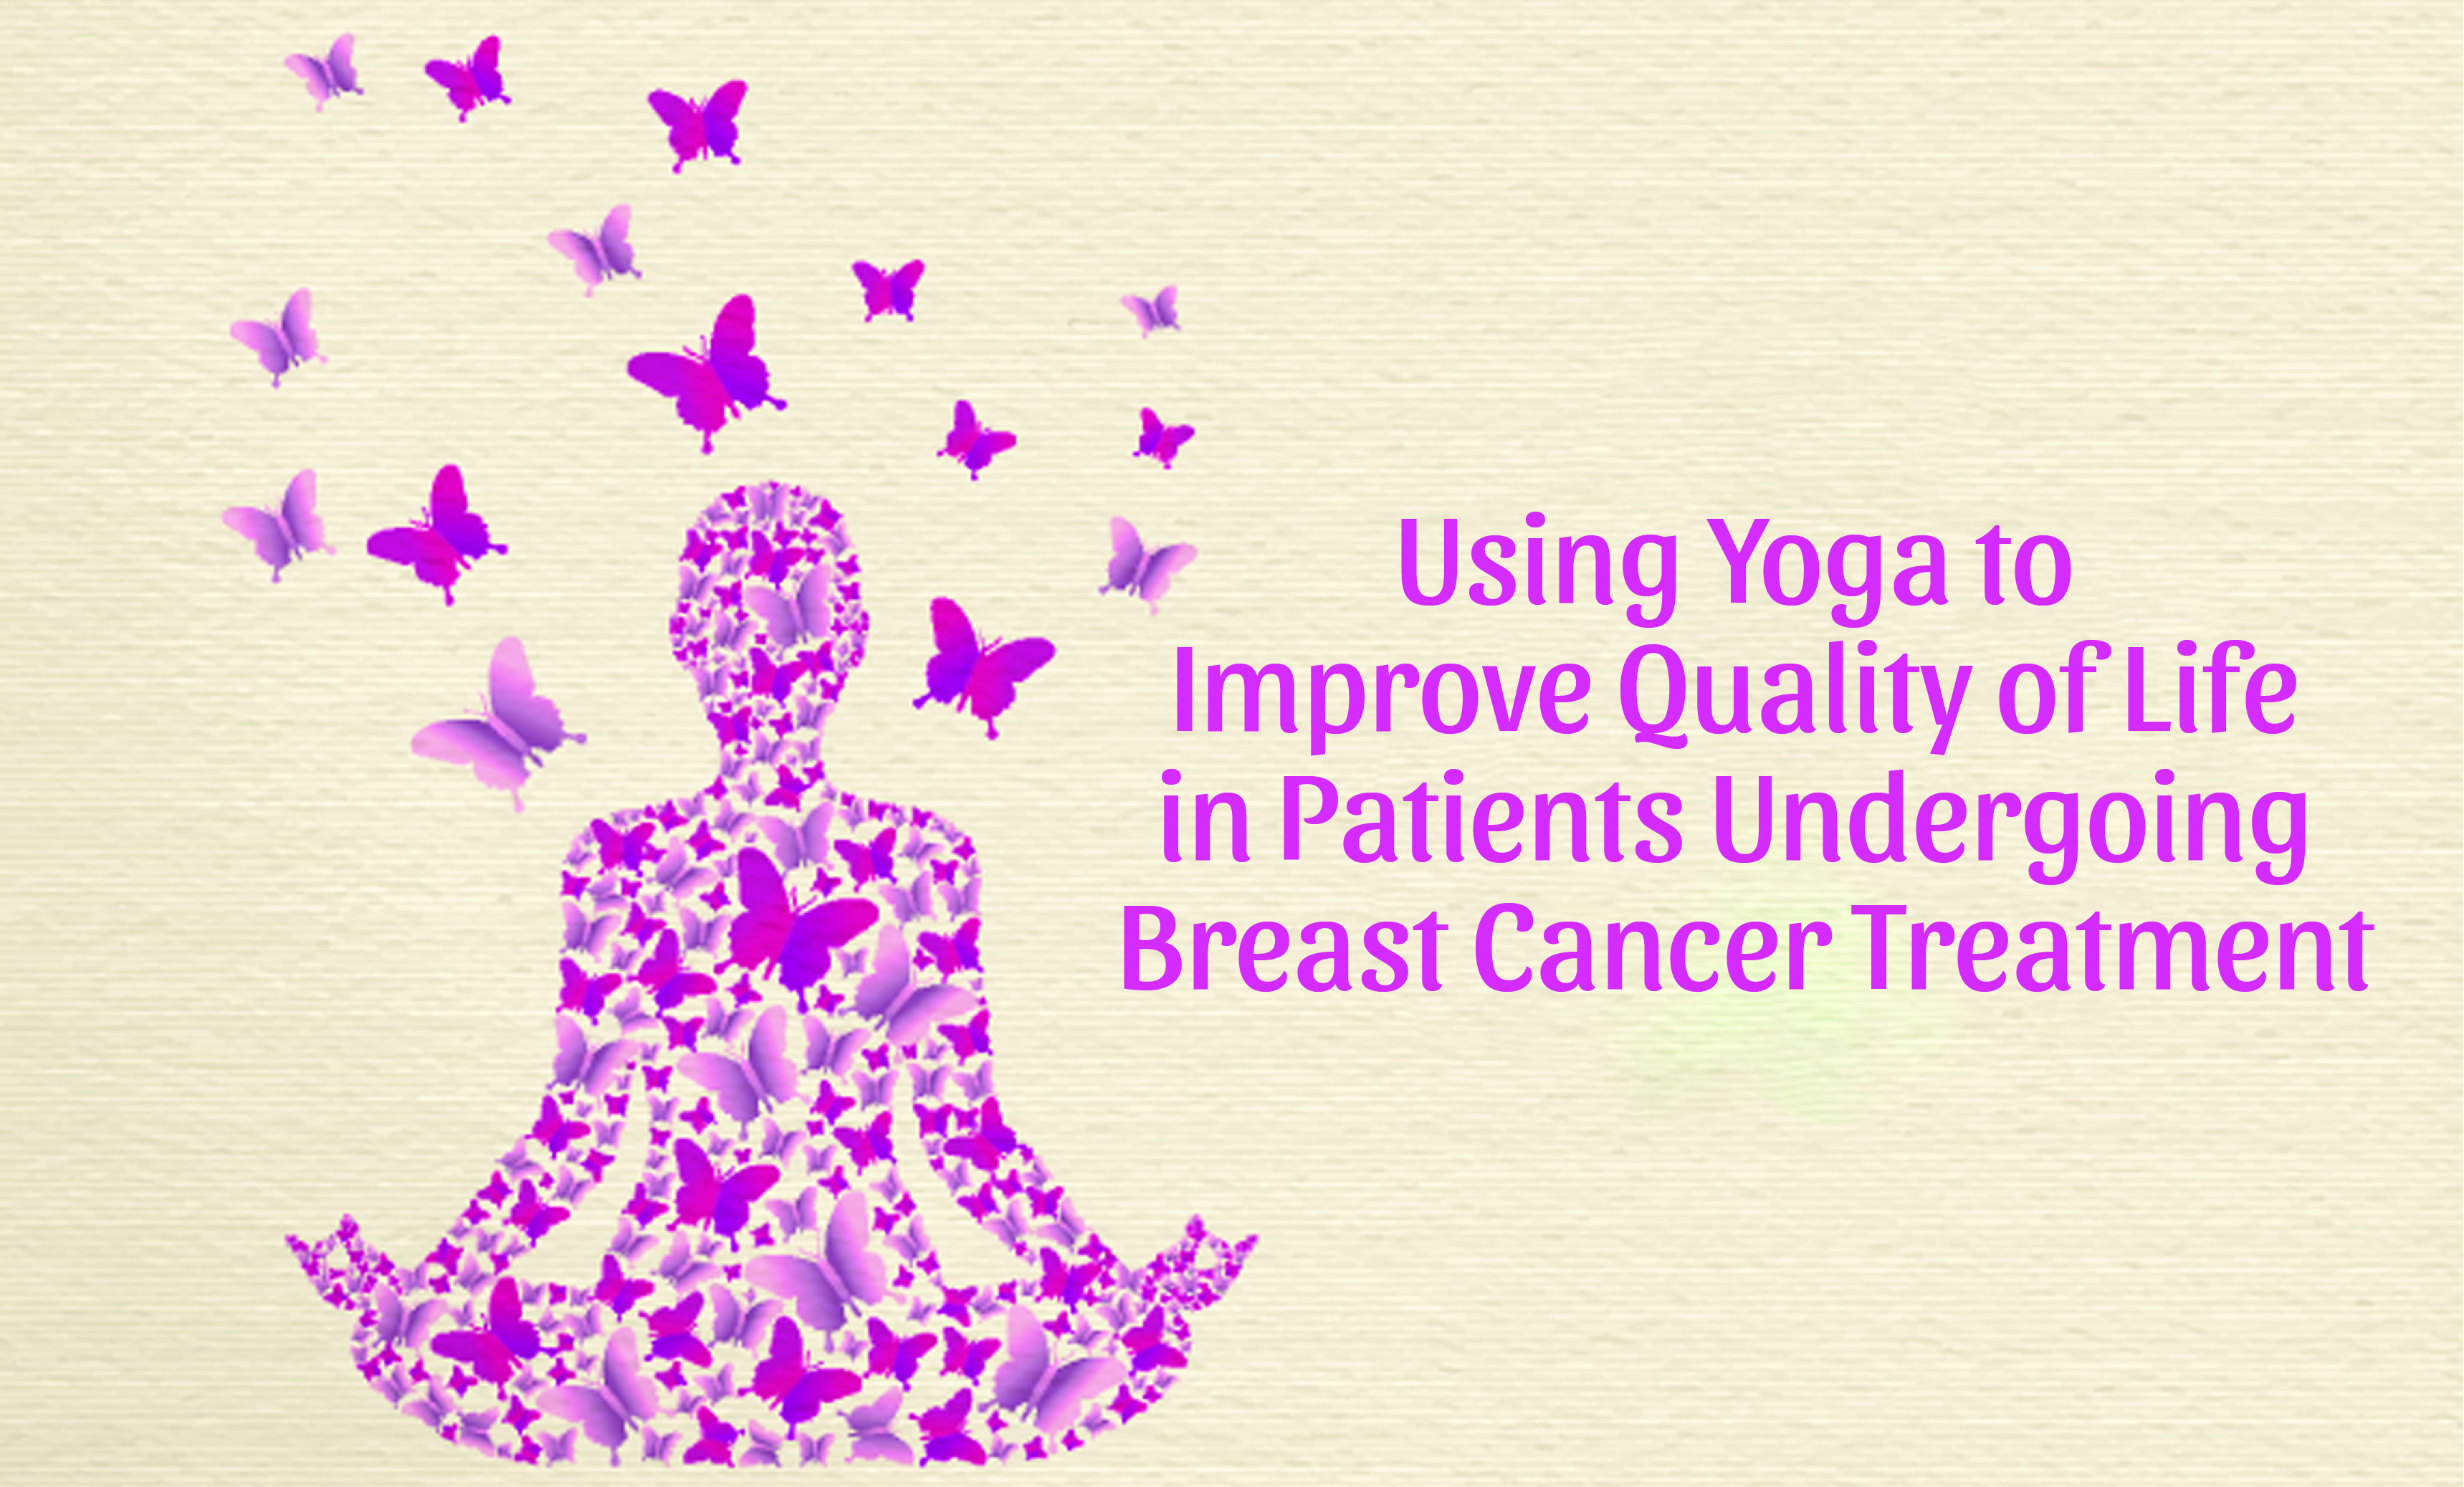 Dr. Nair on Using Yoga to Improve Quality of Life in Patients Undergoing Breast Cancer Treatments